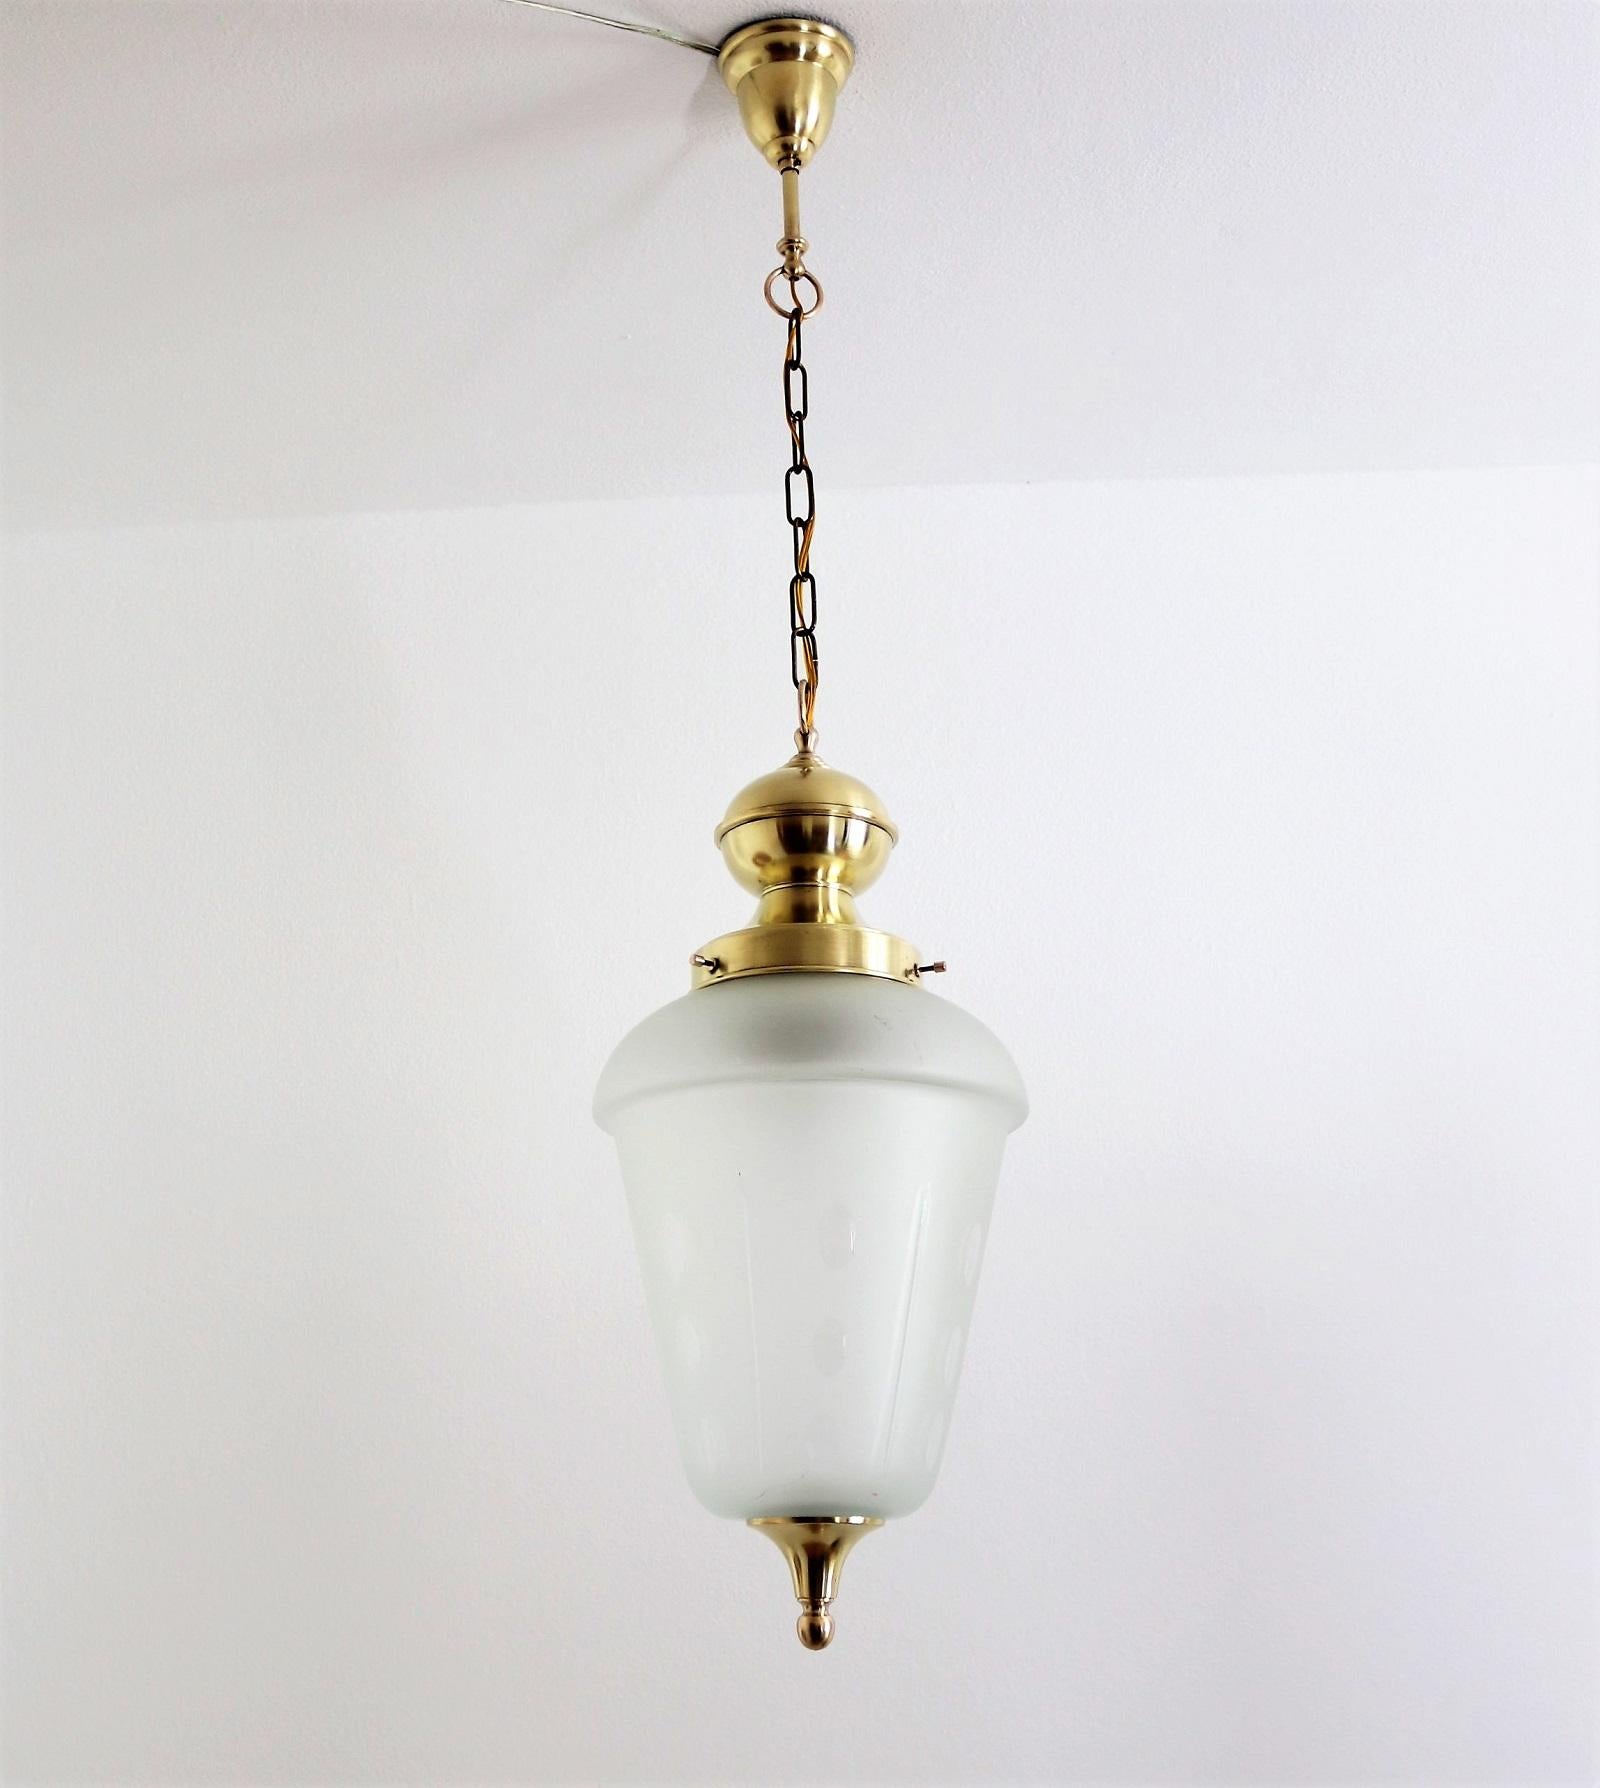 Gorgeous lantern or pendant lamp from the late Italian midcentury, made during the 1960s-1970s.
The pendant lamp is made of frosted glass with dots and vertical lines.
The golden details are made of brass, with original ceiling rose and